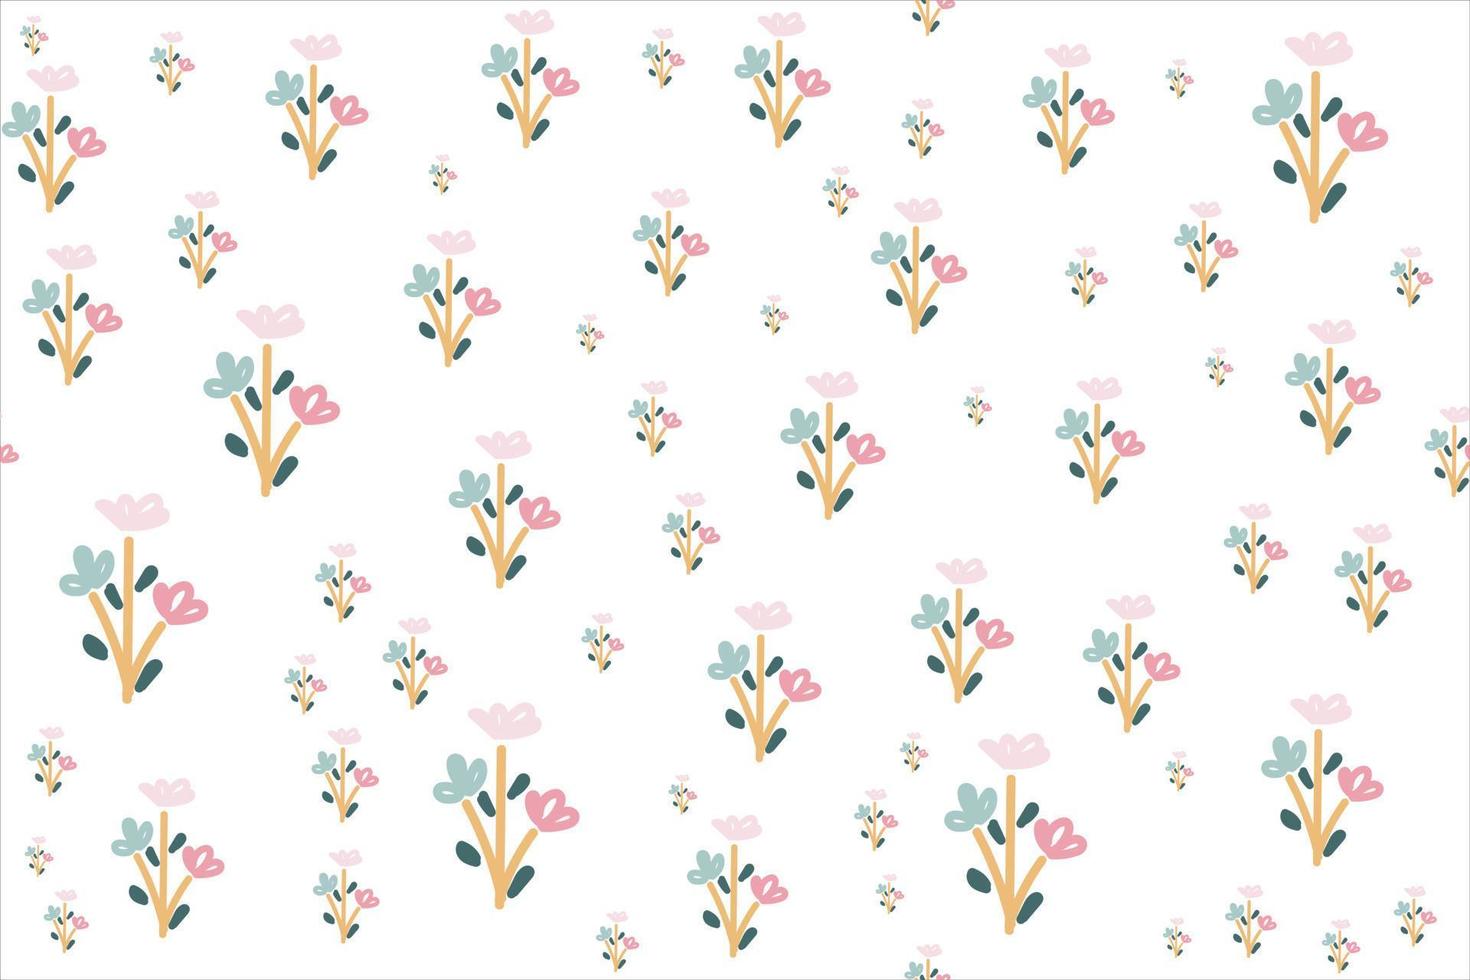 Beauty botanical flower seamless patterns vector ornament design It's a form created by freehand merging. Create beautiful fabric patterns designed for print used in the ,wallpaper,paper,fabric,